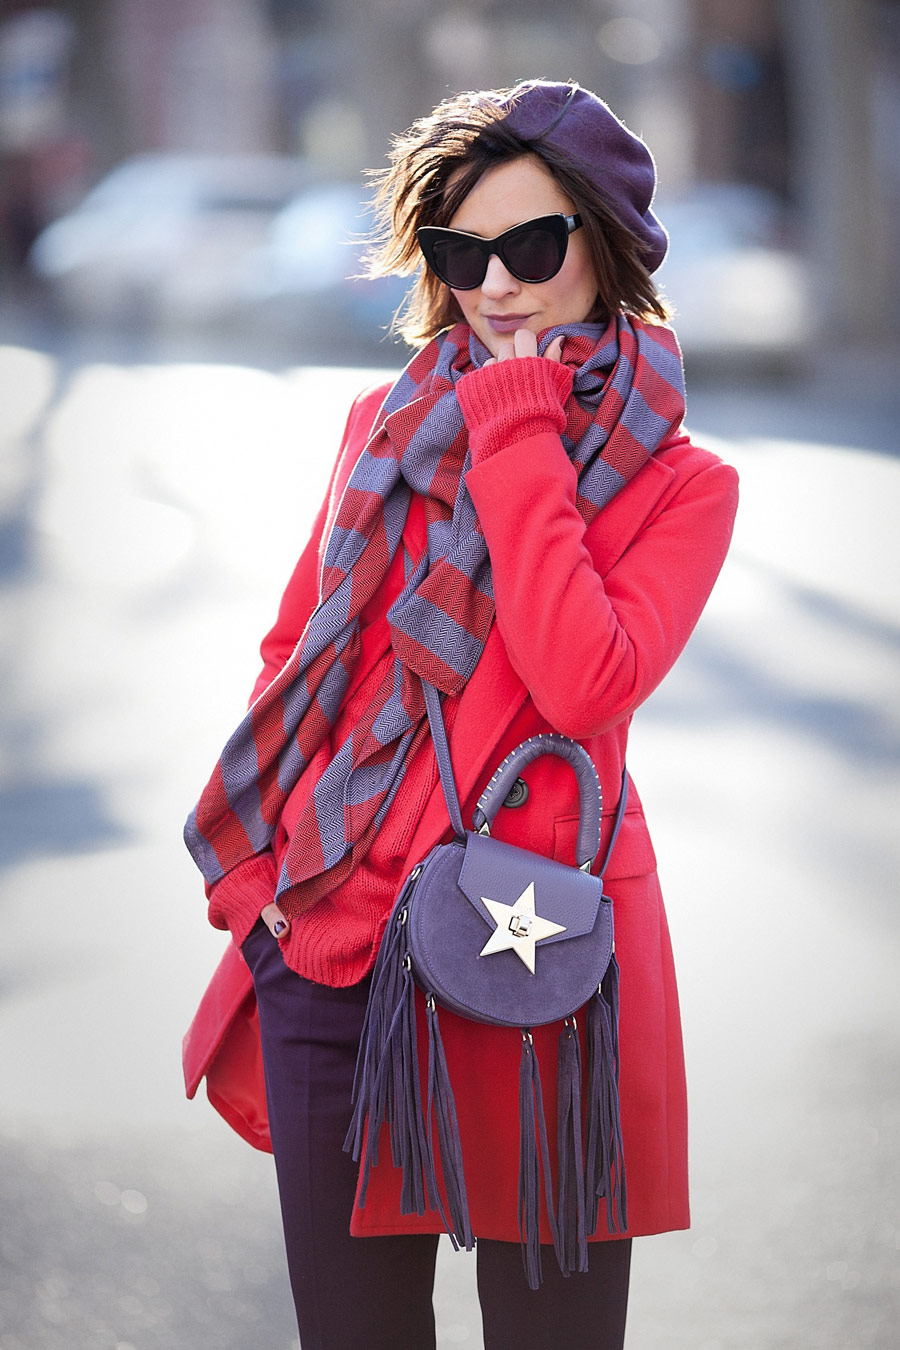 salar bag, salar milano bags, red coat outfit, colorblock outfit, winter outfit ideas,